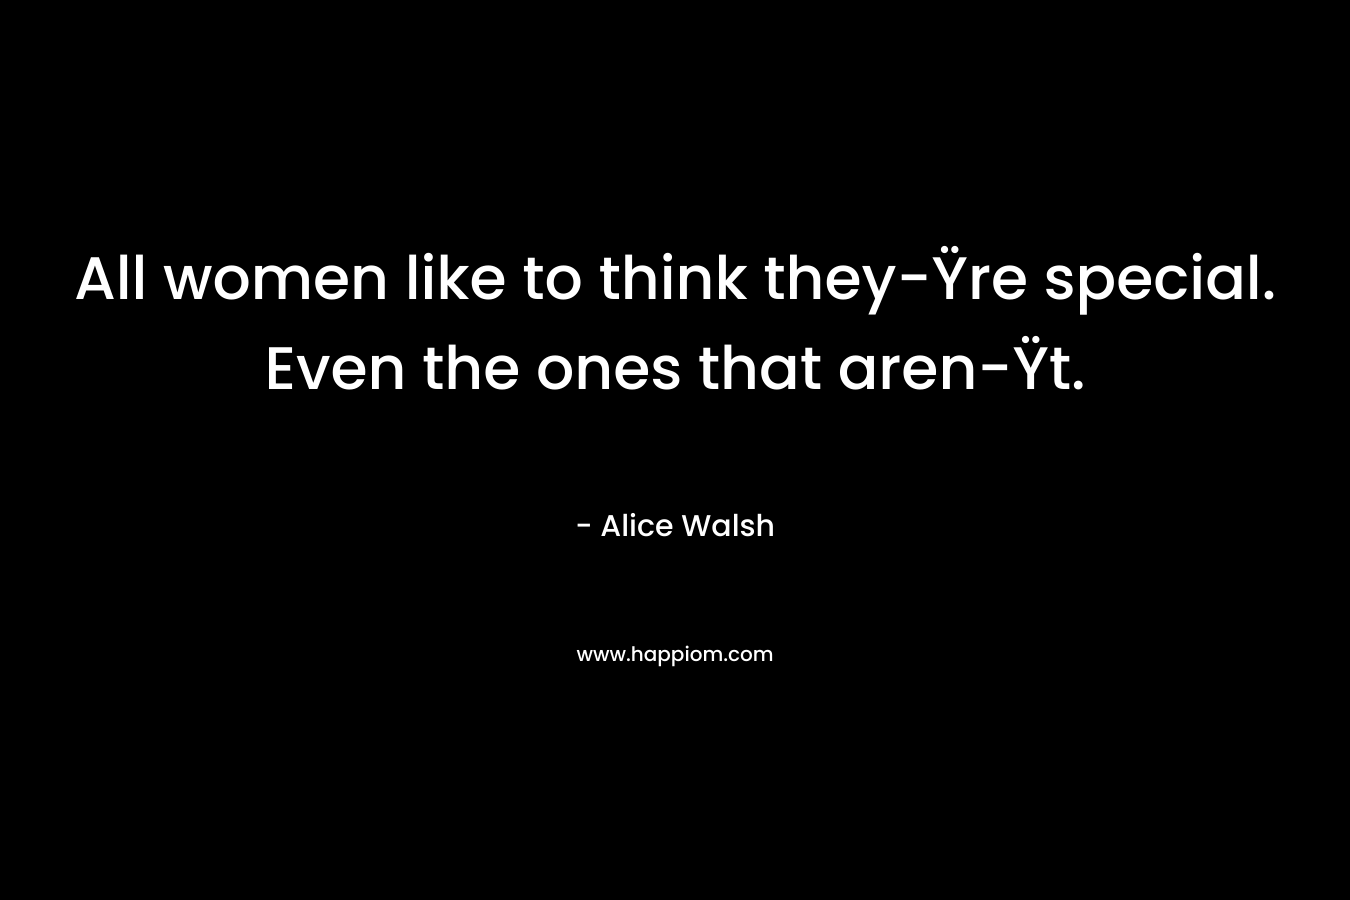 All women like to think they-Ÿre special. Even the ones that aren-Ÿt.